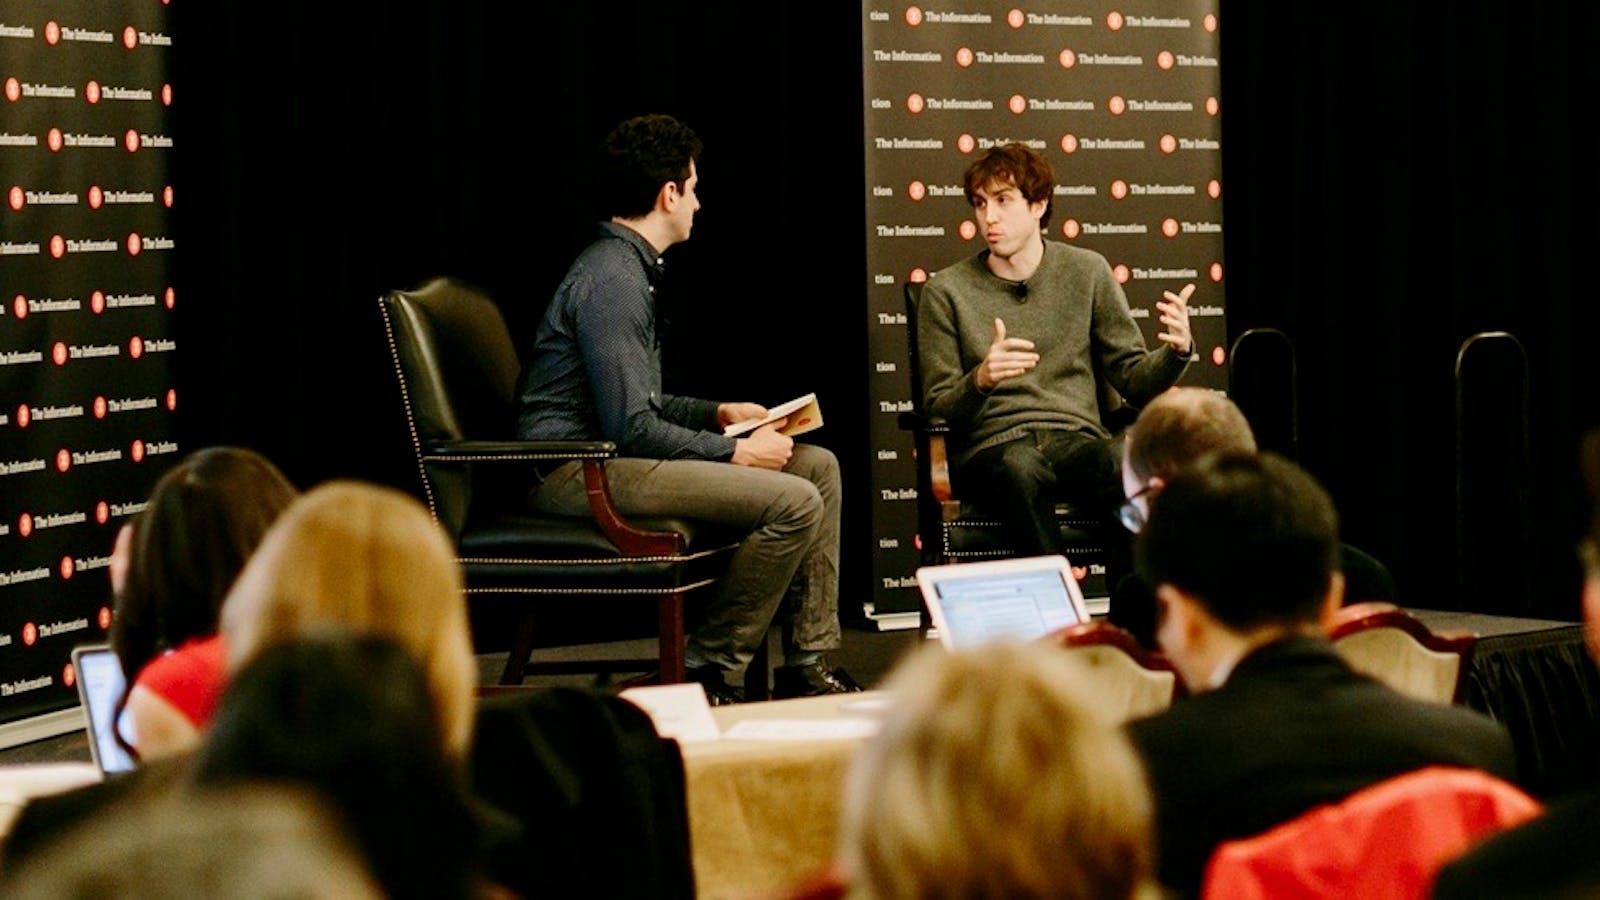 Quora CEO Adam D'Angelo talking with The Information's Tom Dotan at The Information's NYC Subscriber Summit on Tuesday. Photo by Karen Obrist